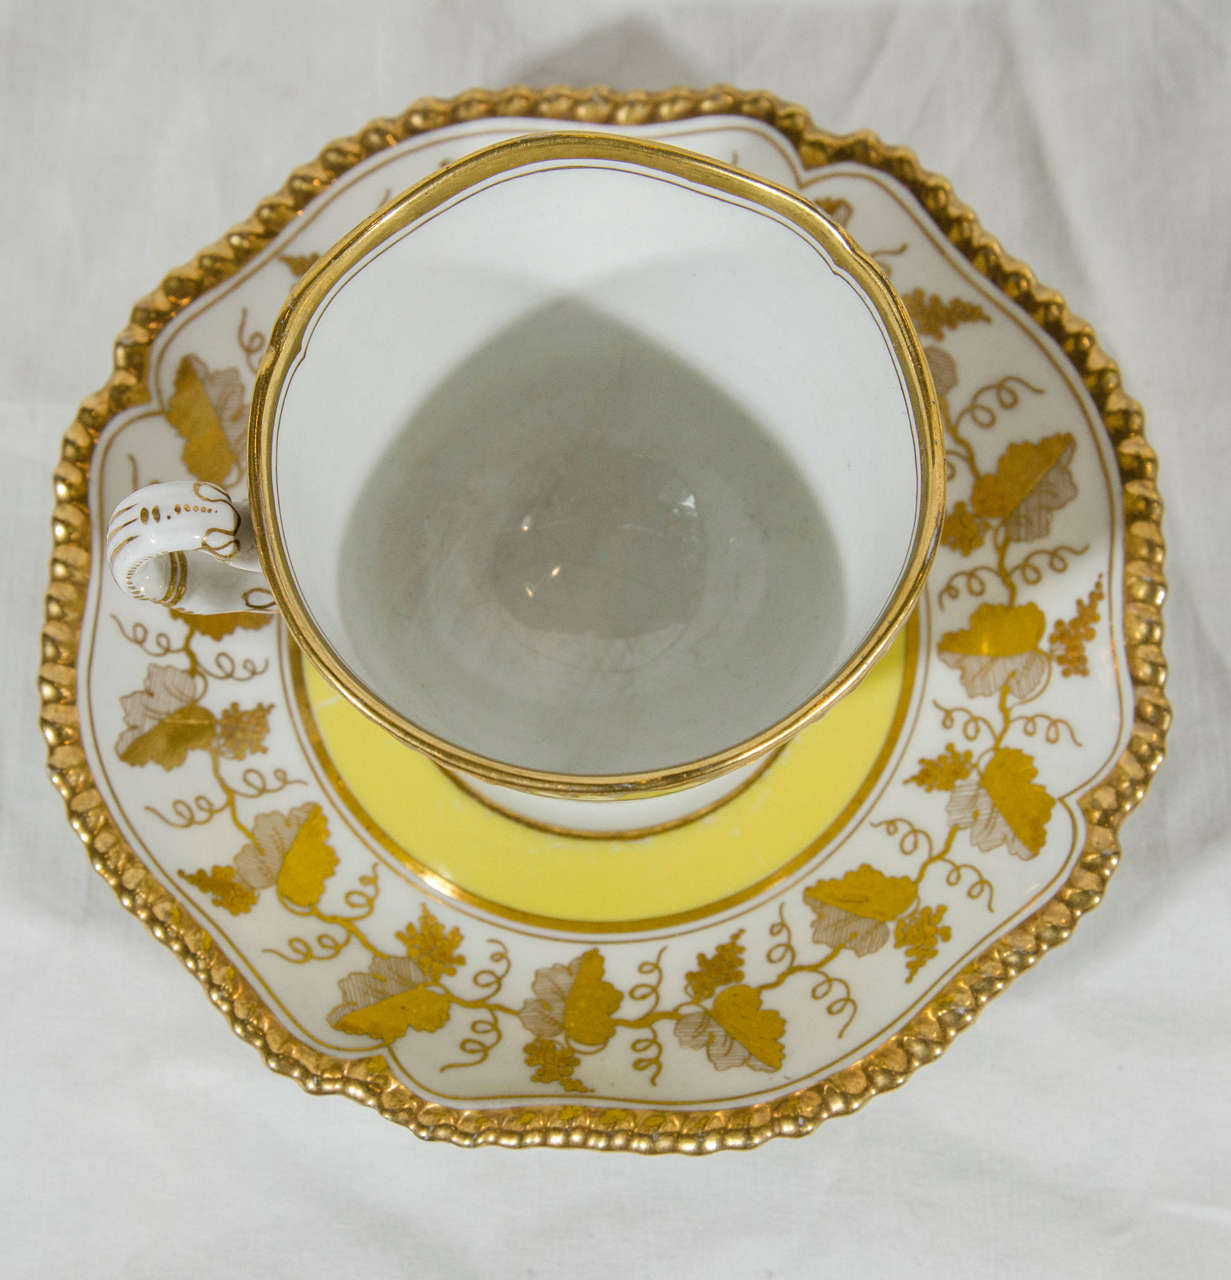 Early 19th Century  Antique Worcester Porcelain Tea Cups and Saucers Yellow and Gold 